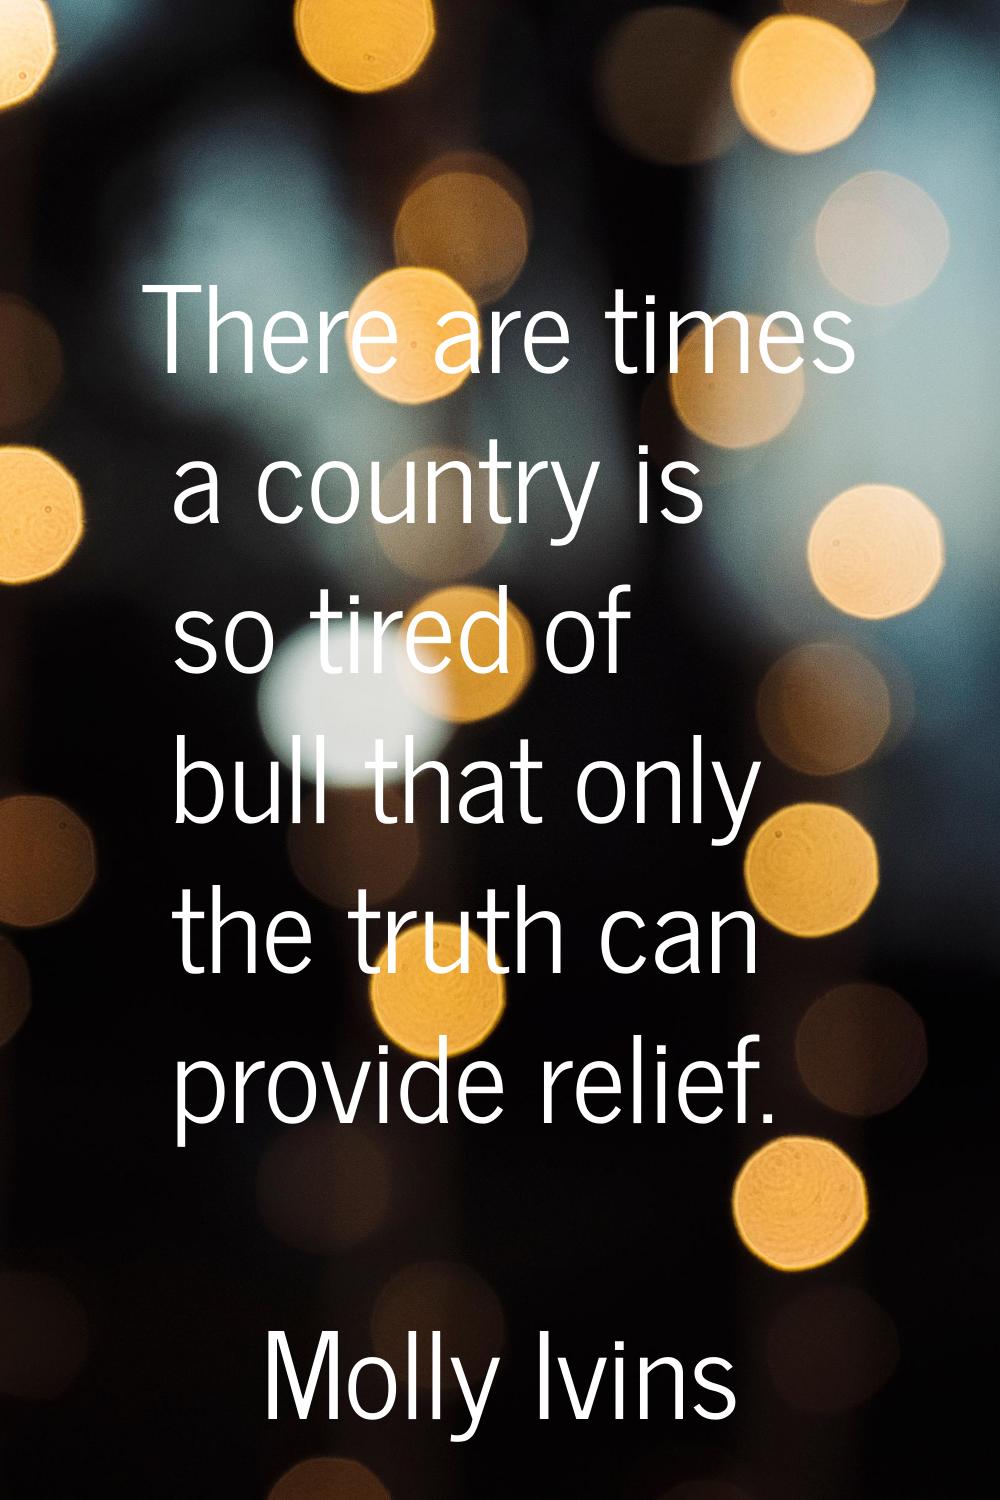 There are times a country is so tired of bull that only the truth can provide relief.